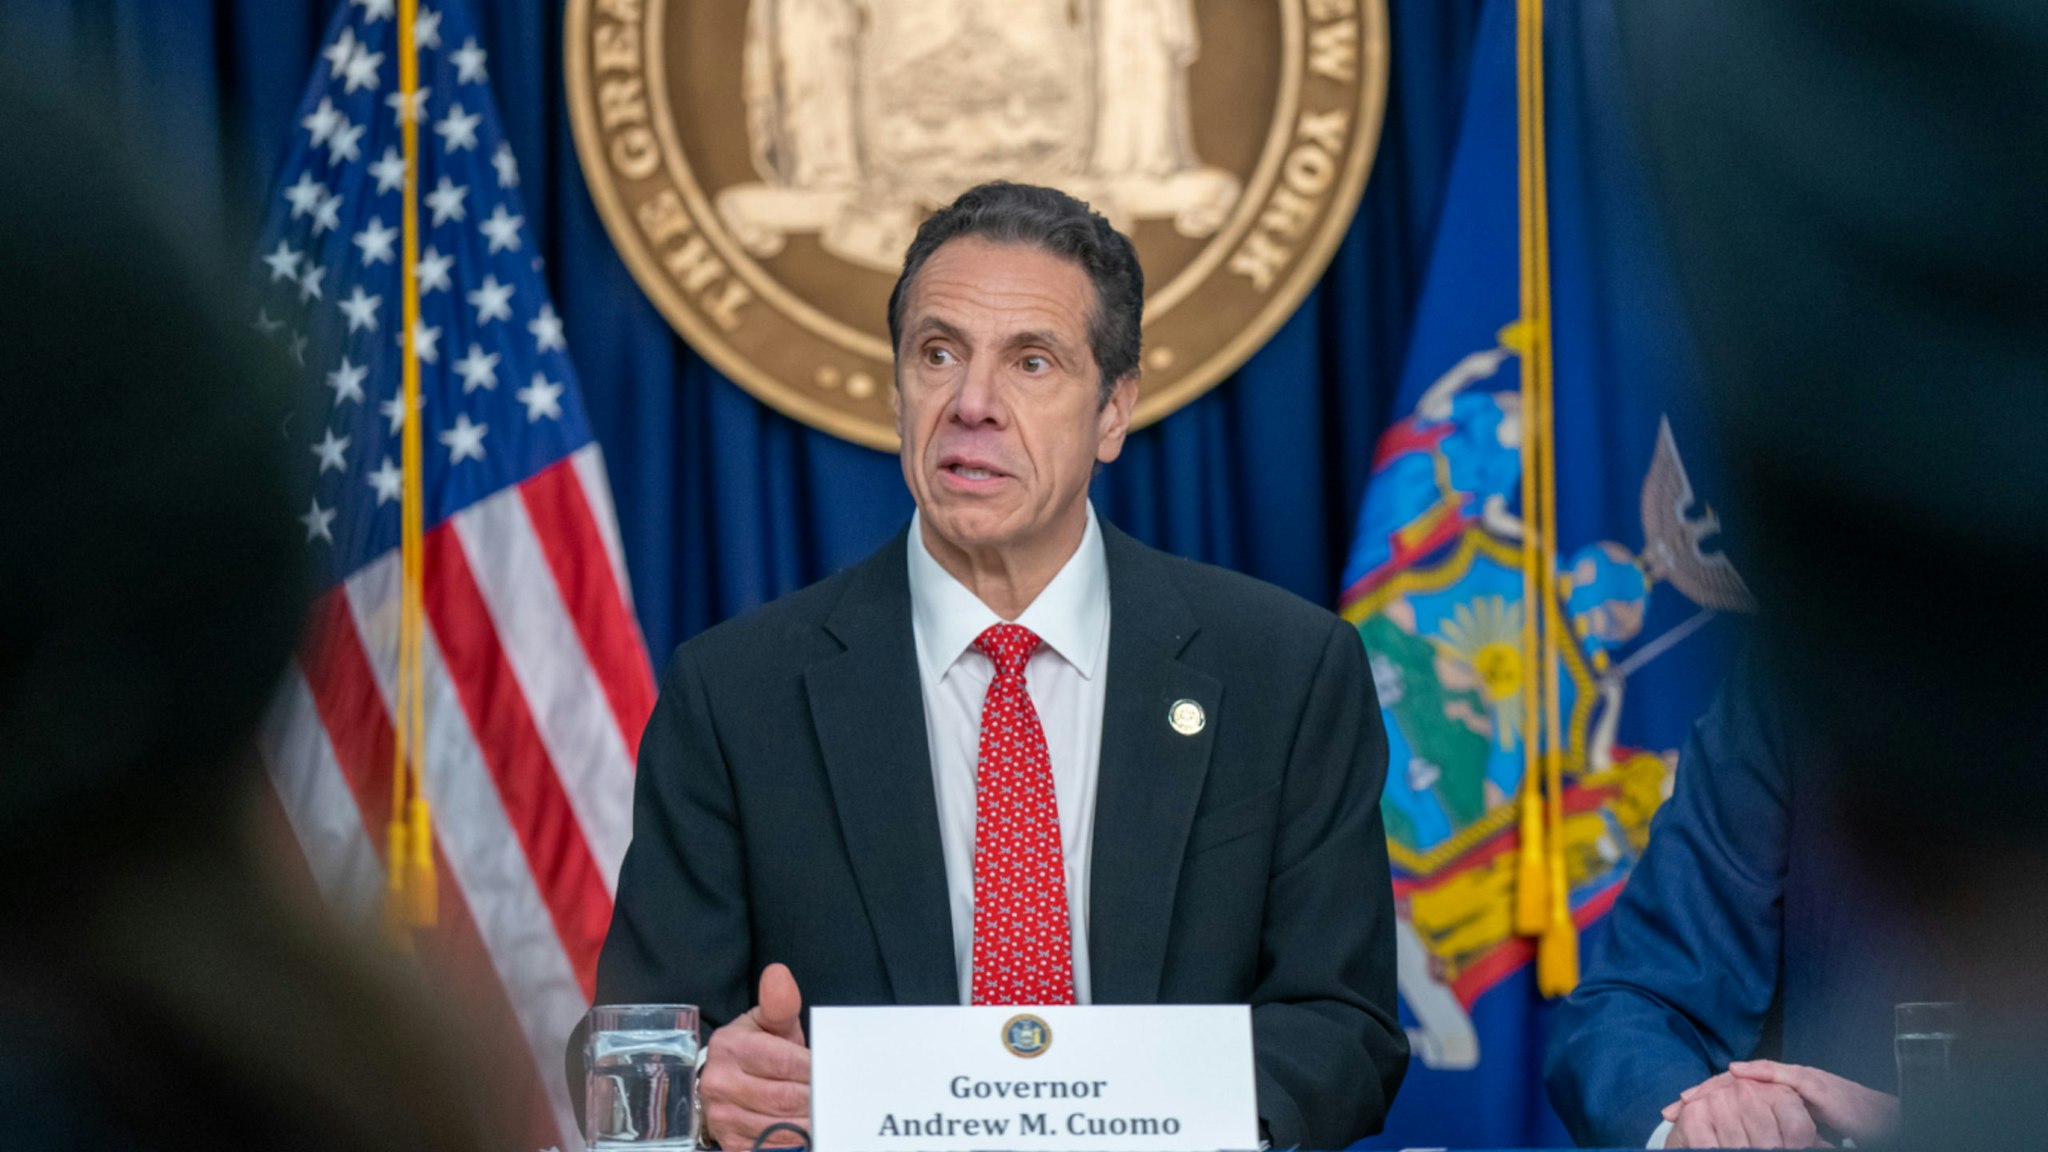 New York state Gov. Andrew Cuomo speaks during a news conference on the first confirmed case of COVID-19 in New York on March 2, 2020 in New York City.